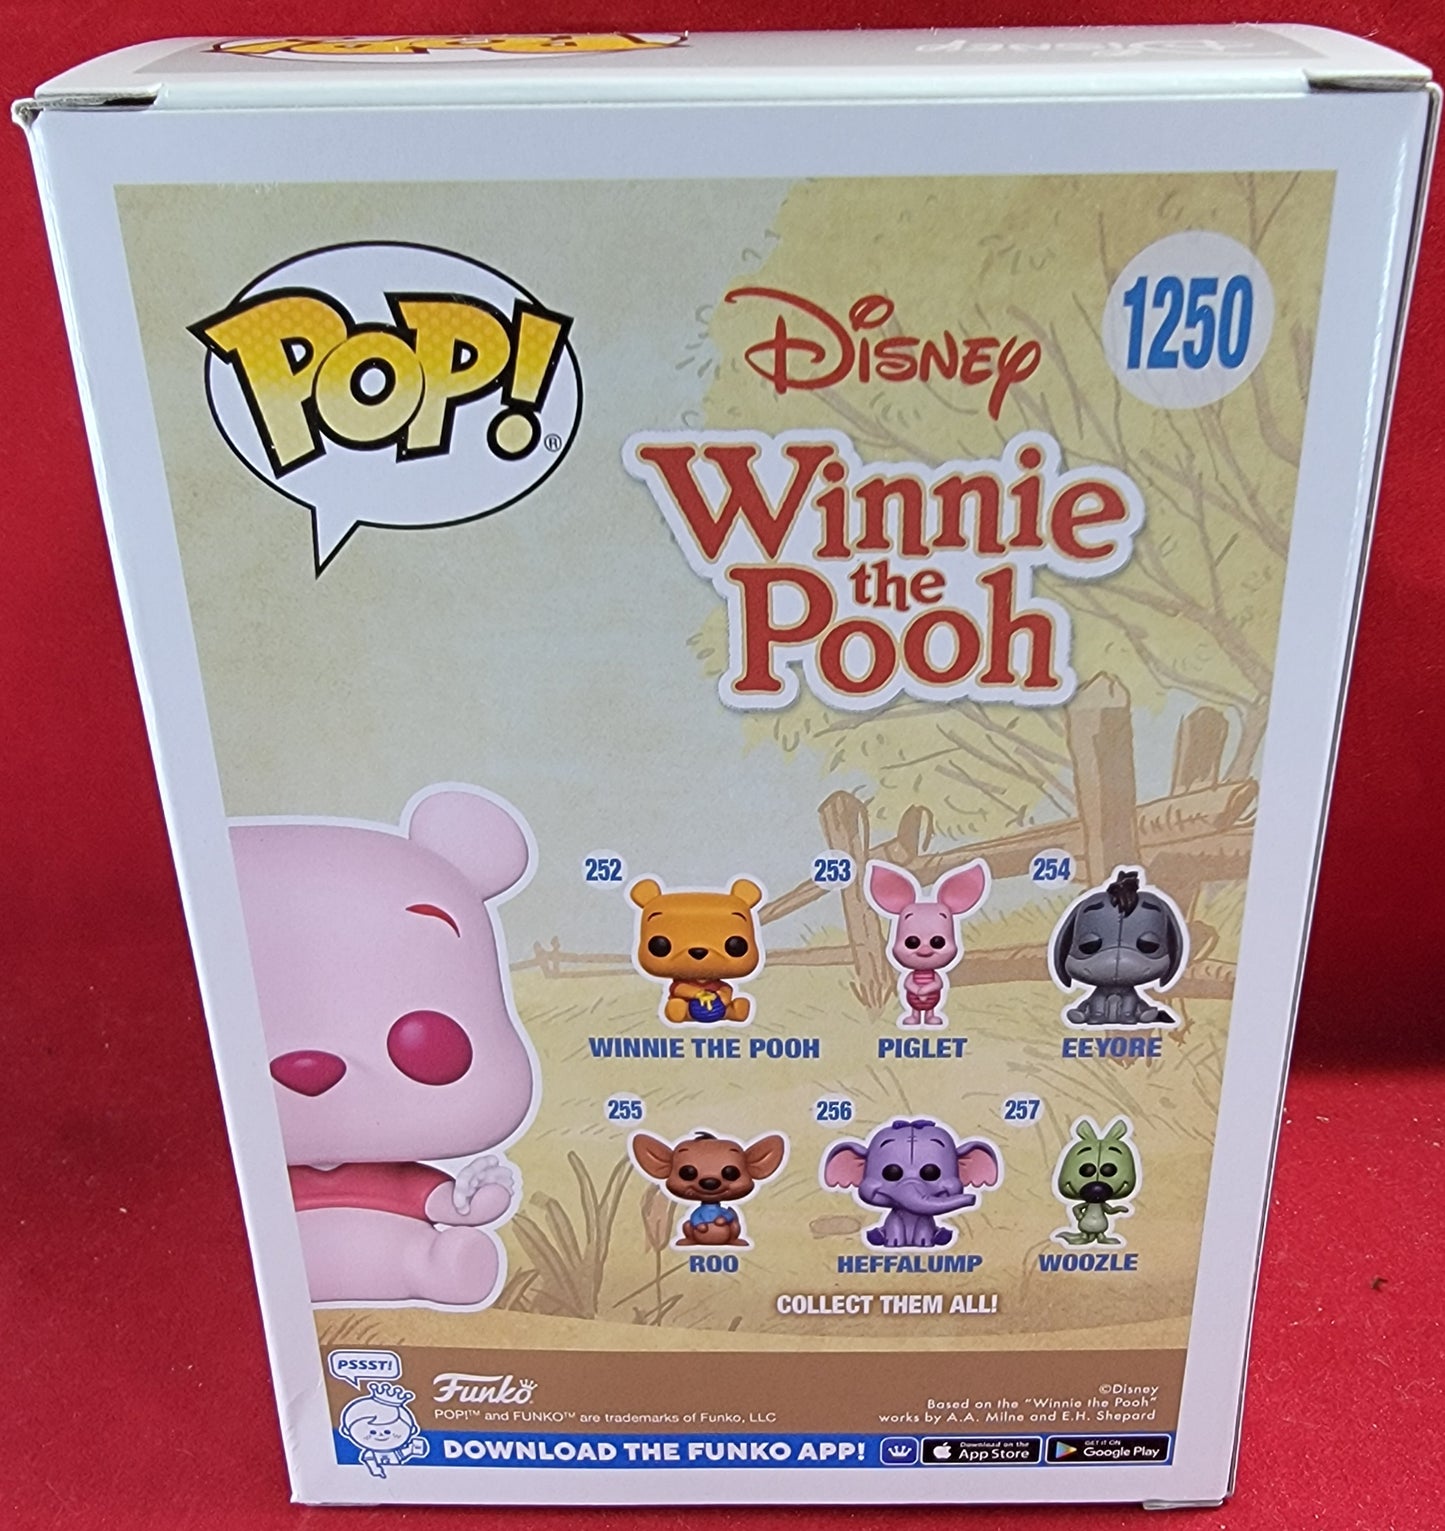 Winnie the pooh hot topic exclusive funko # 1250 (nib)
With pop protector